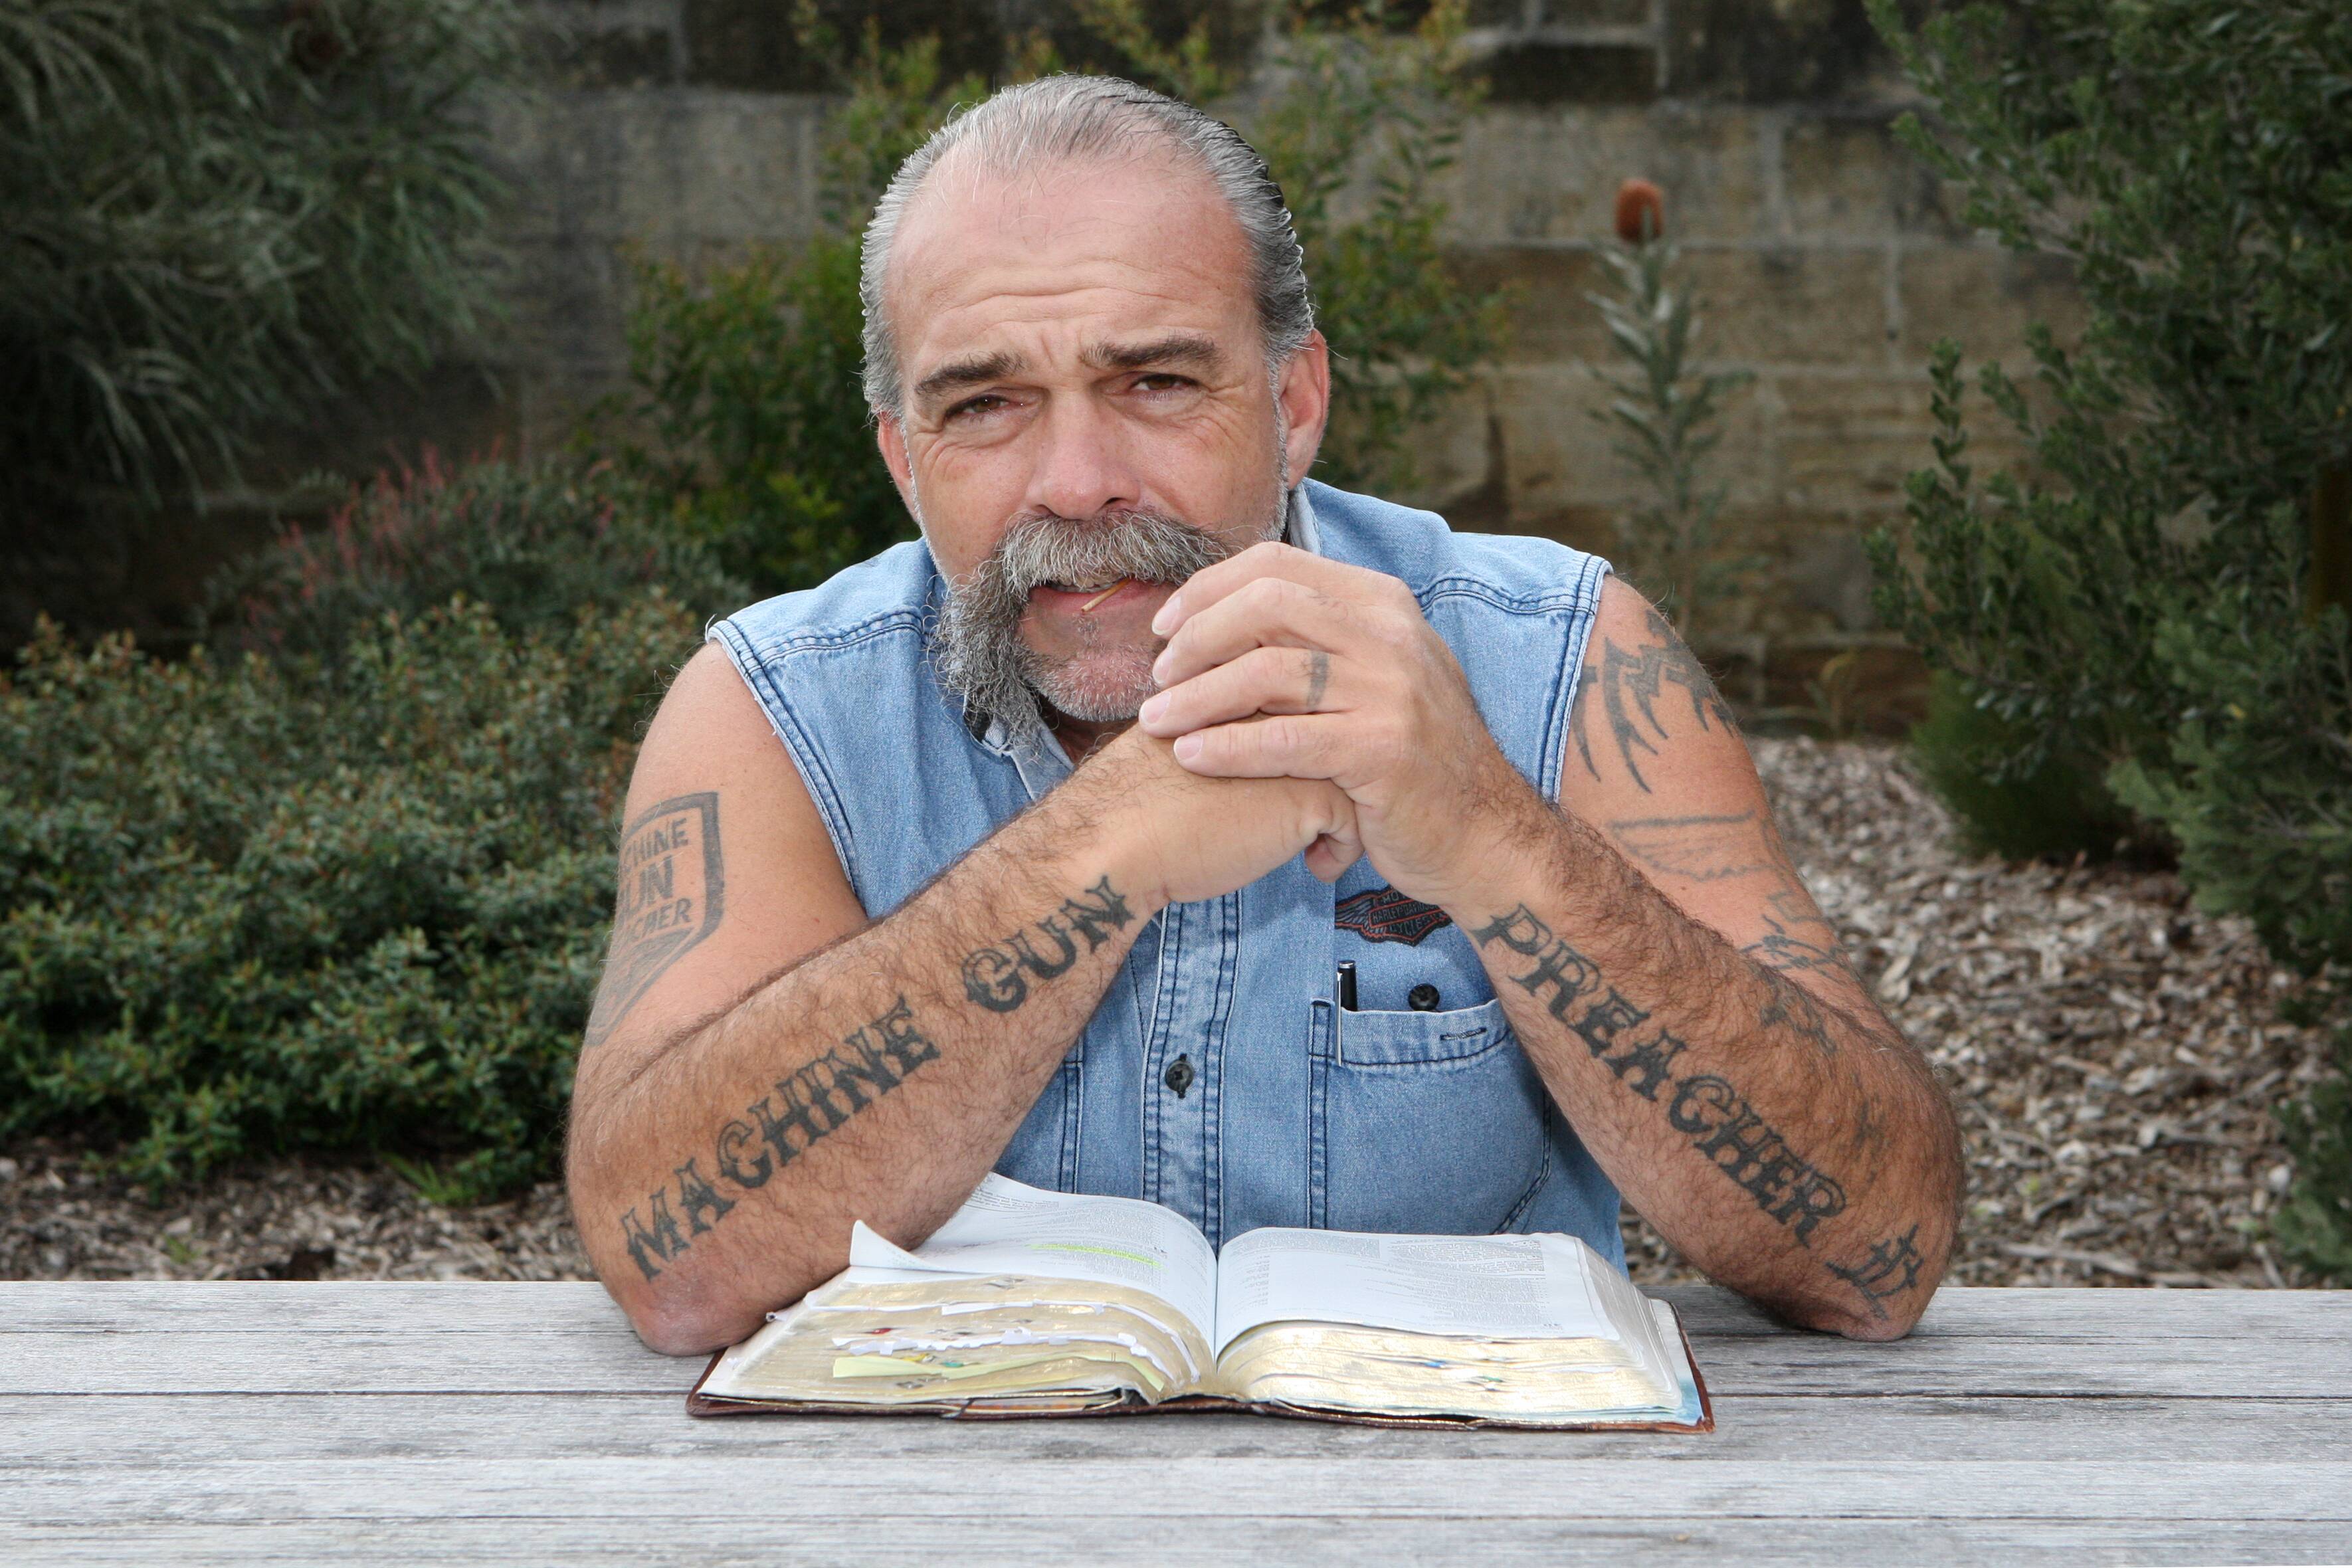 Sam Childers Second Wife: Is He Married To Lynn?